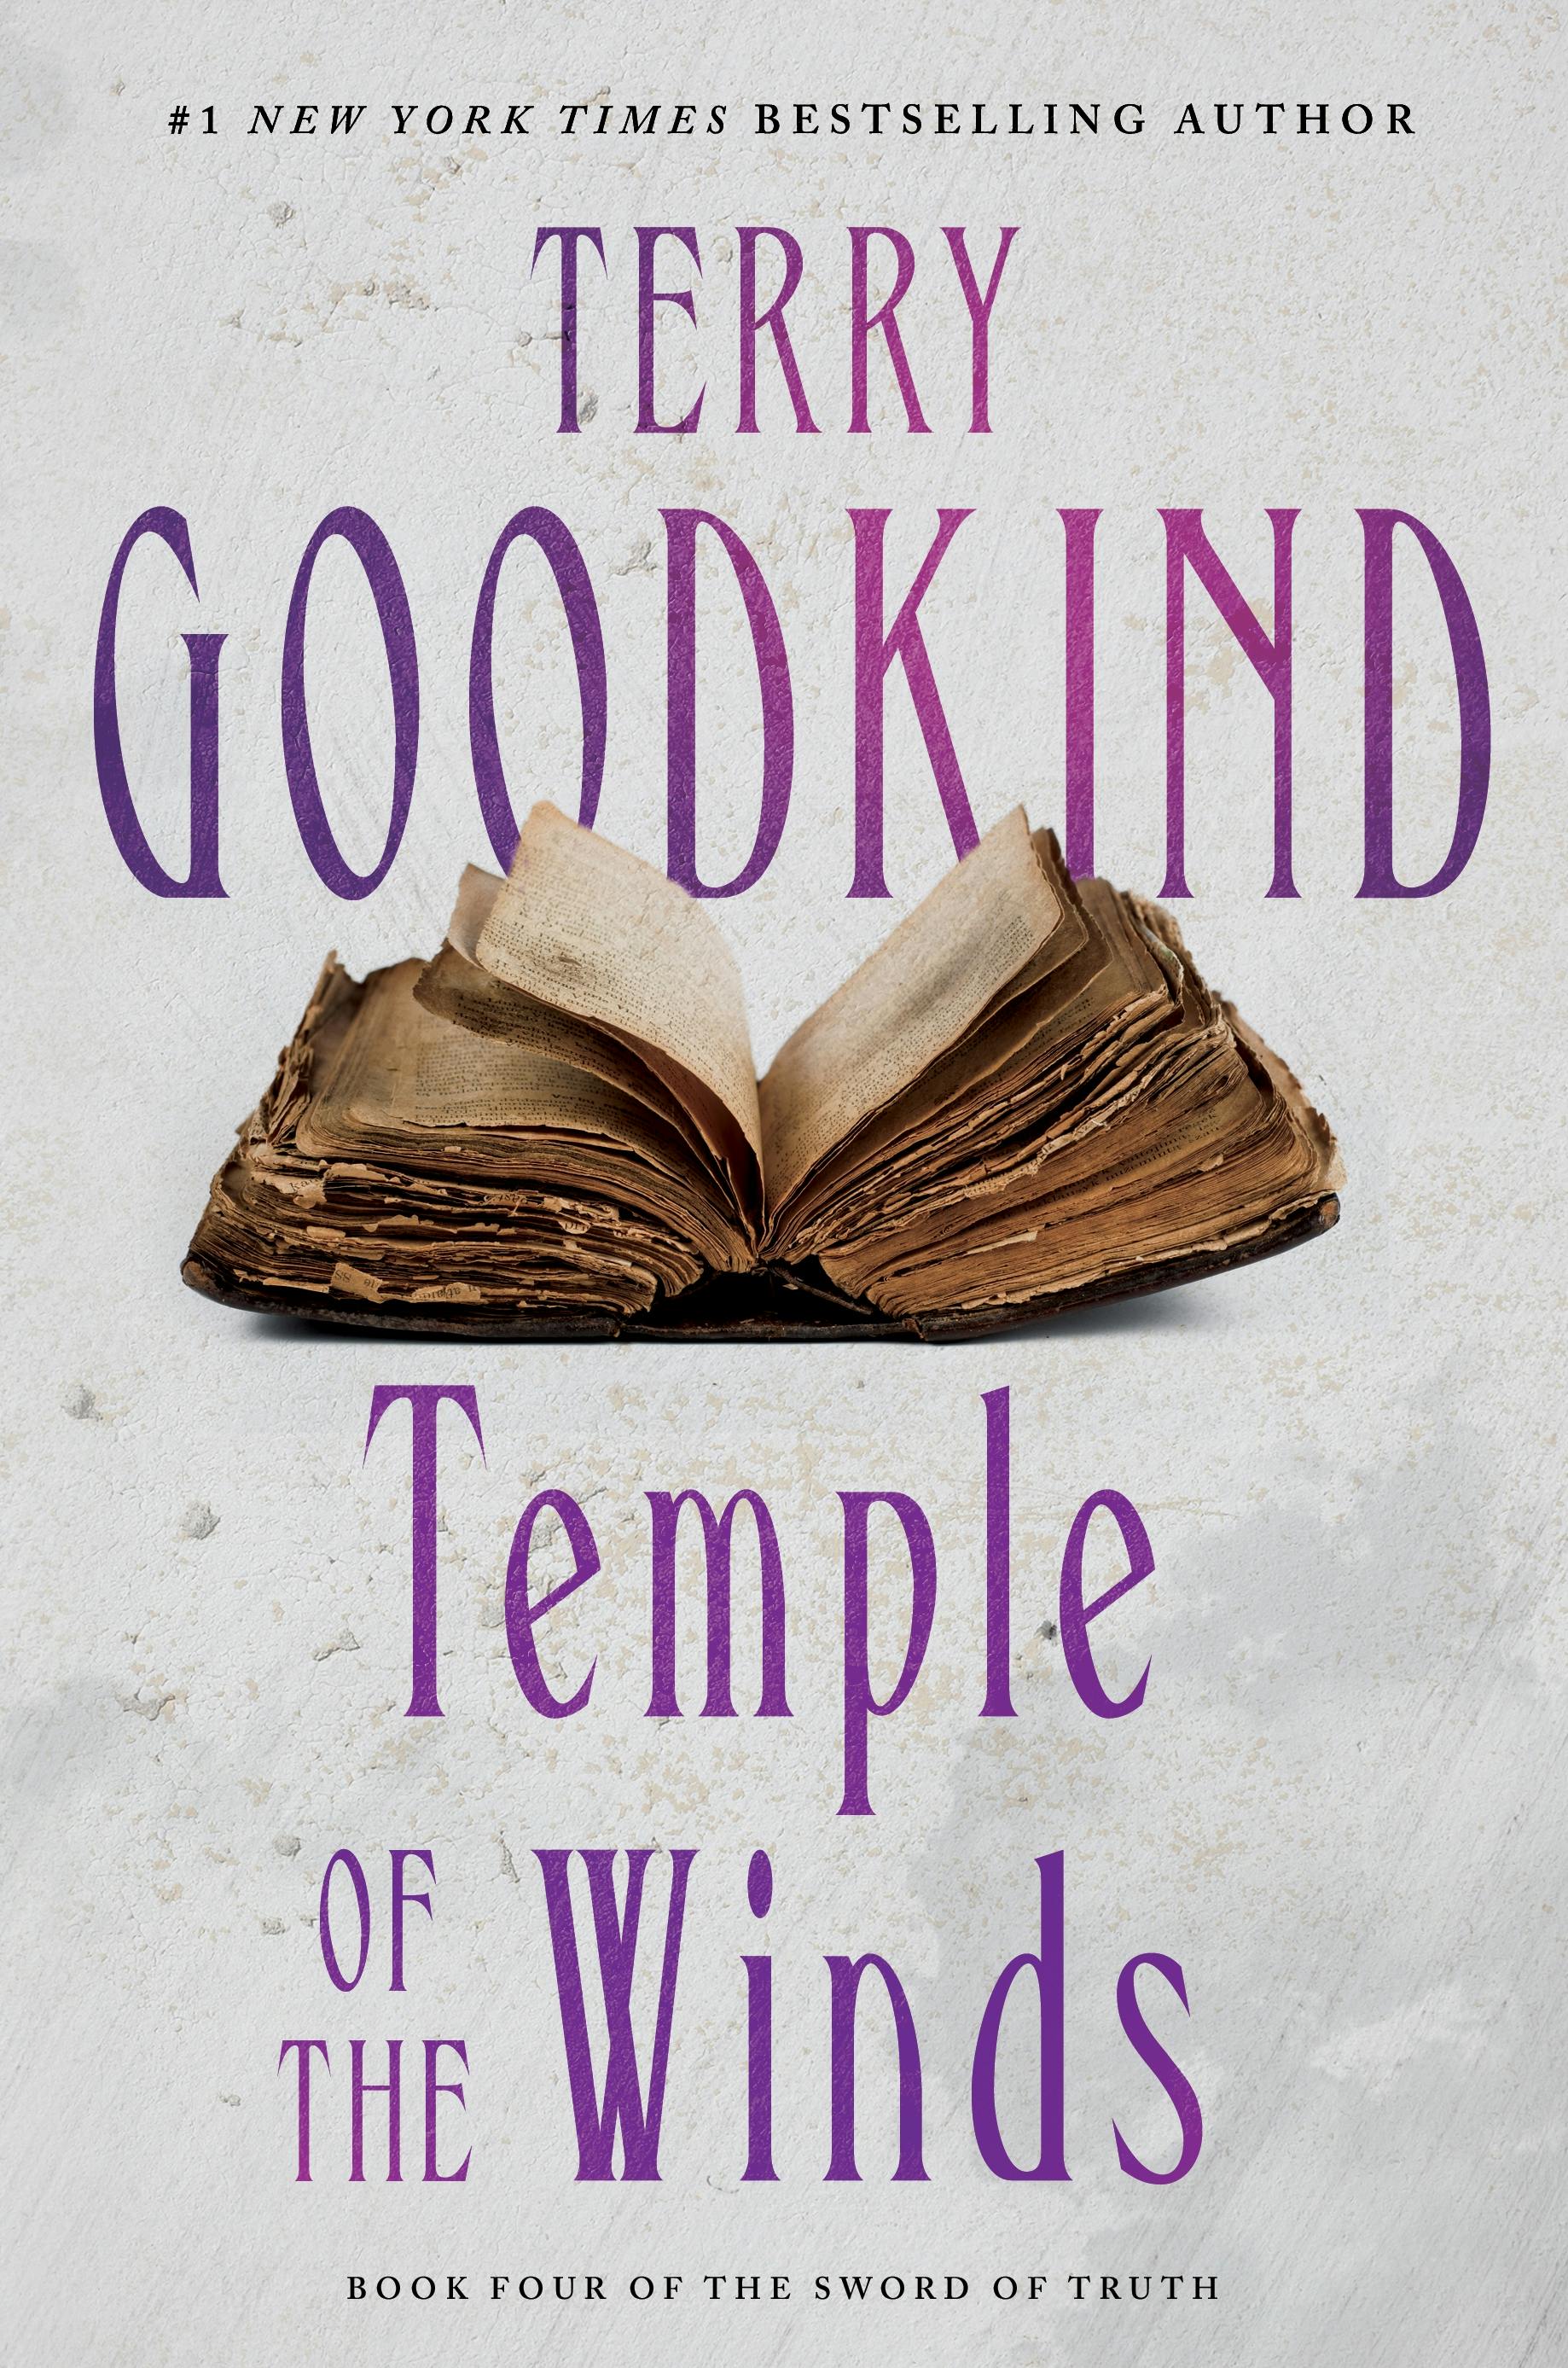 Cover for the book titled as: Temple of the Winds